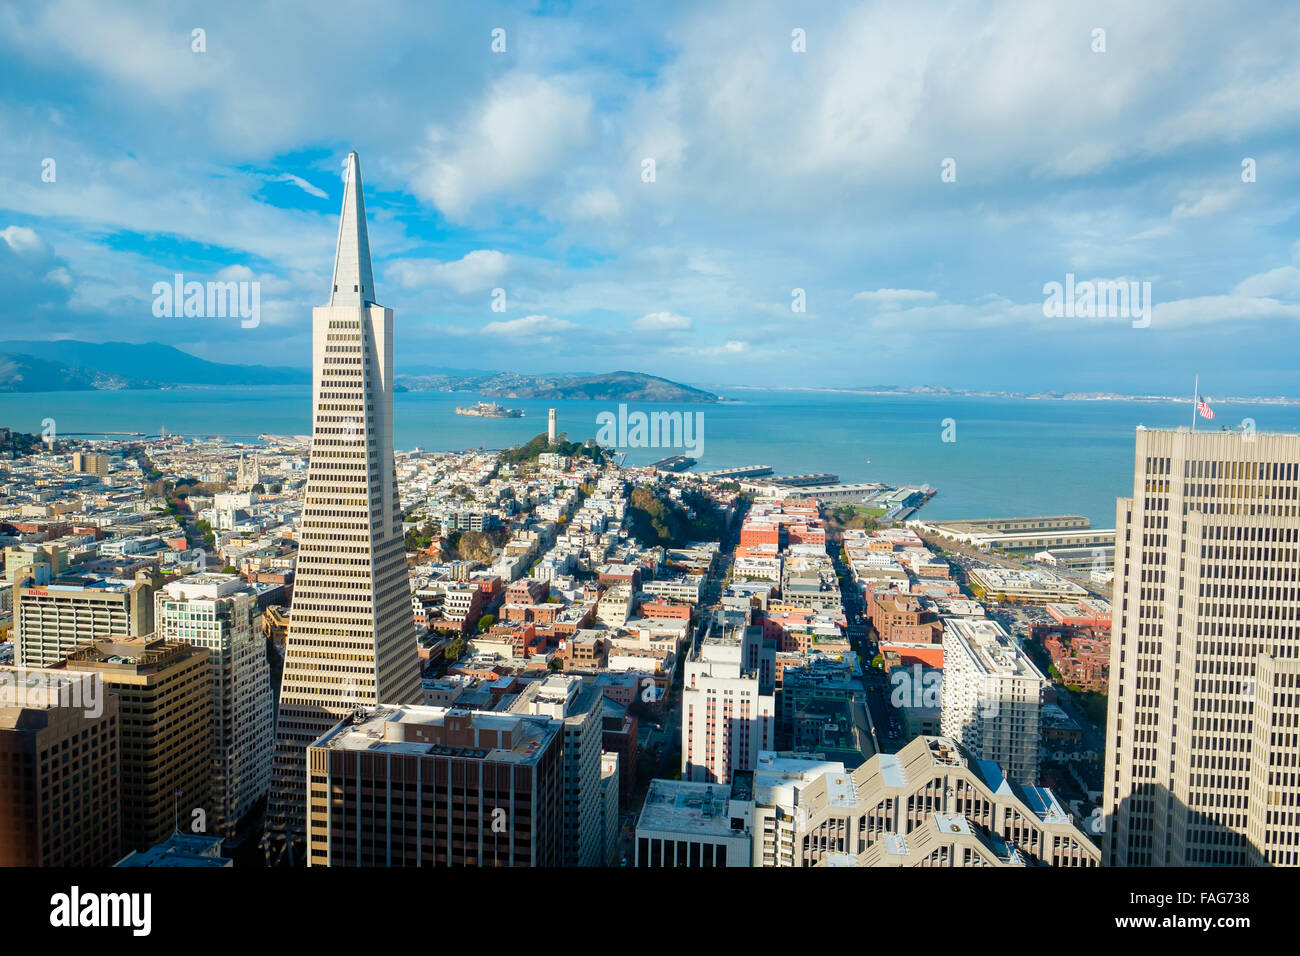 City views of San Francisco from very high up in a hotel building looking to the North towards the bay with Alcatraz Island. Stock Photo